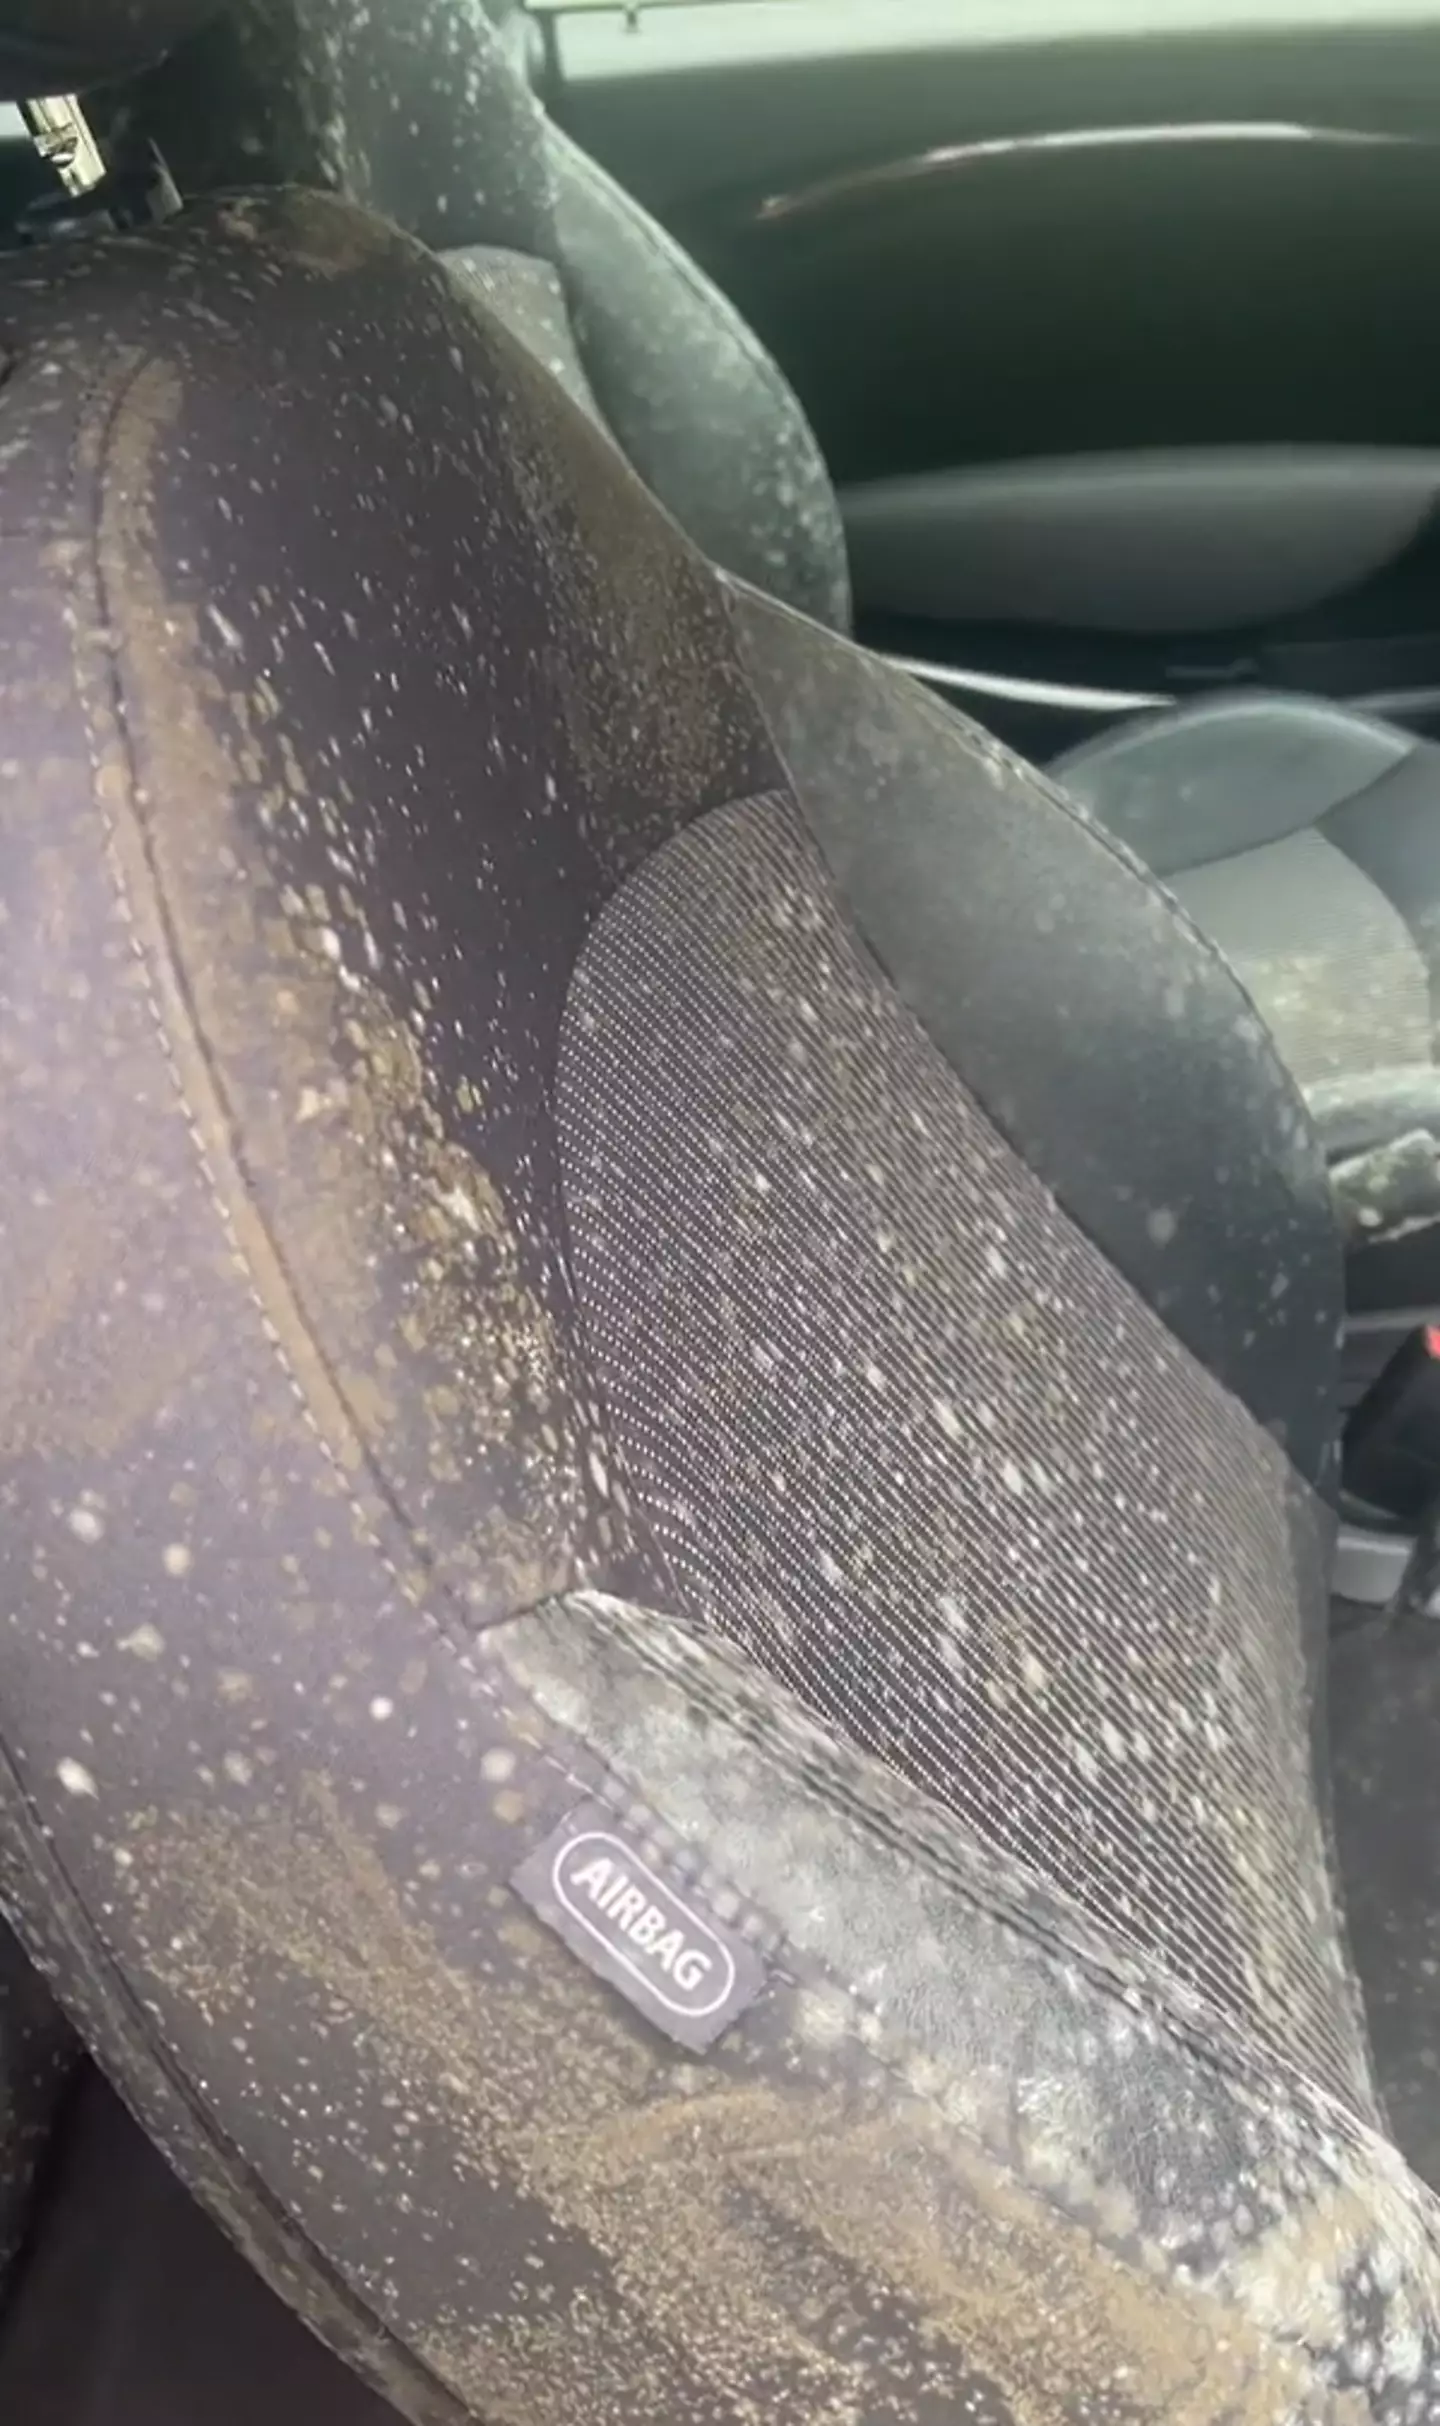 Mould can grow inside cars when moisture is allowed in.